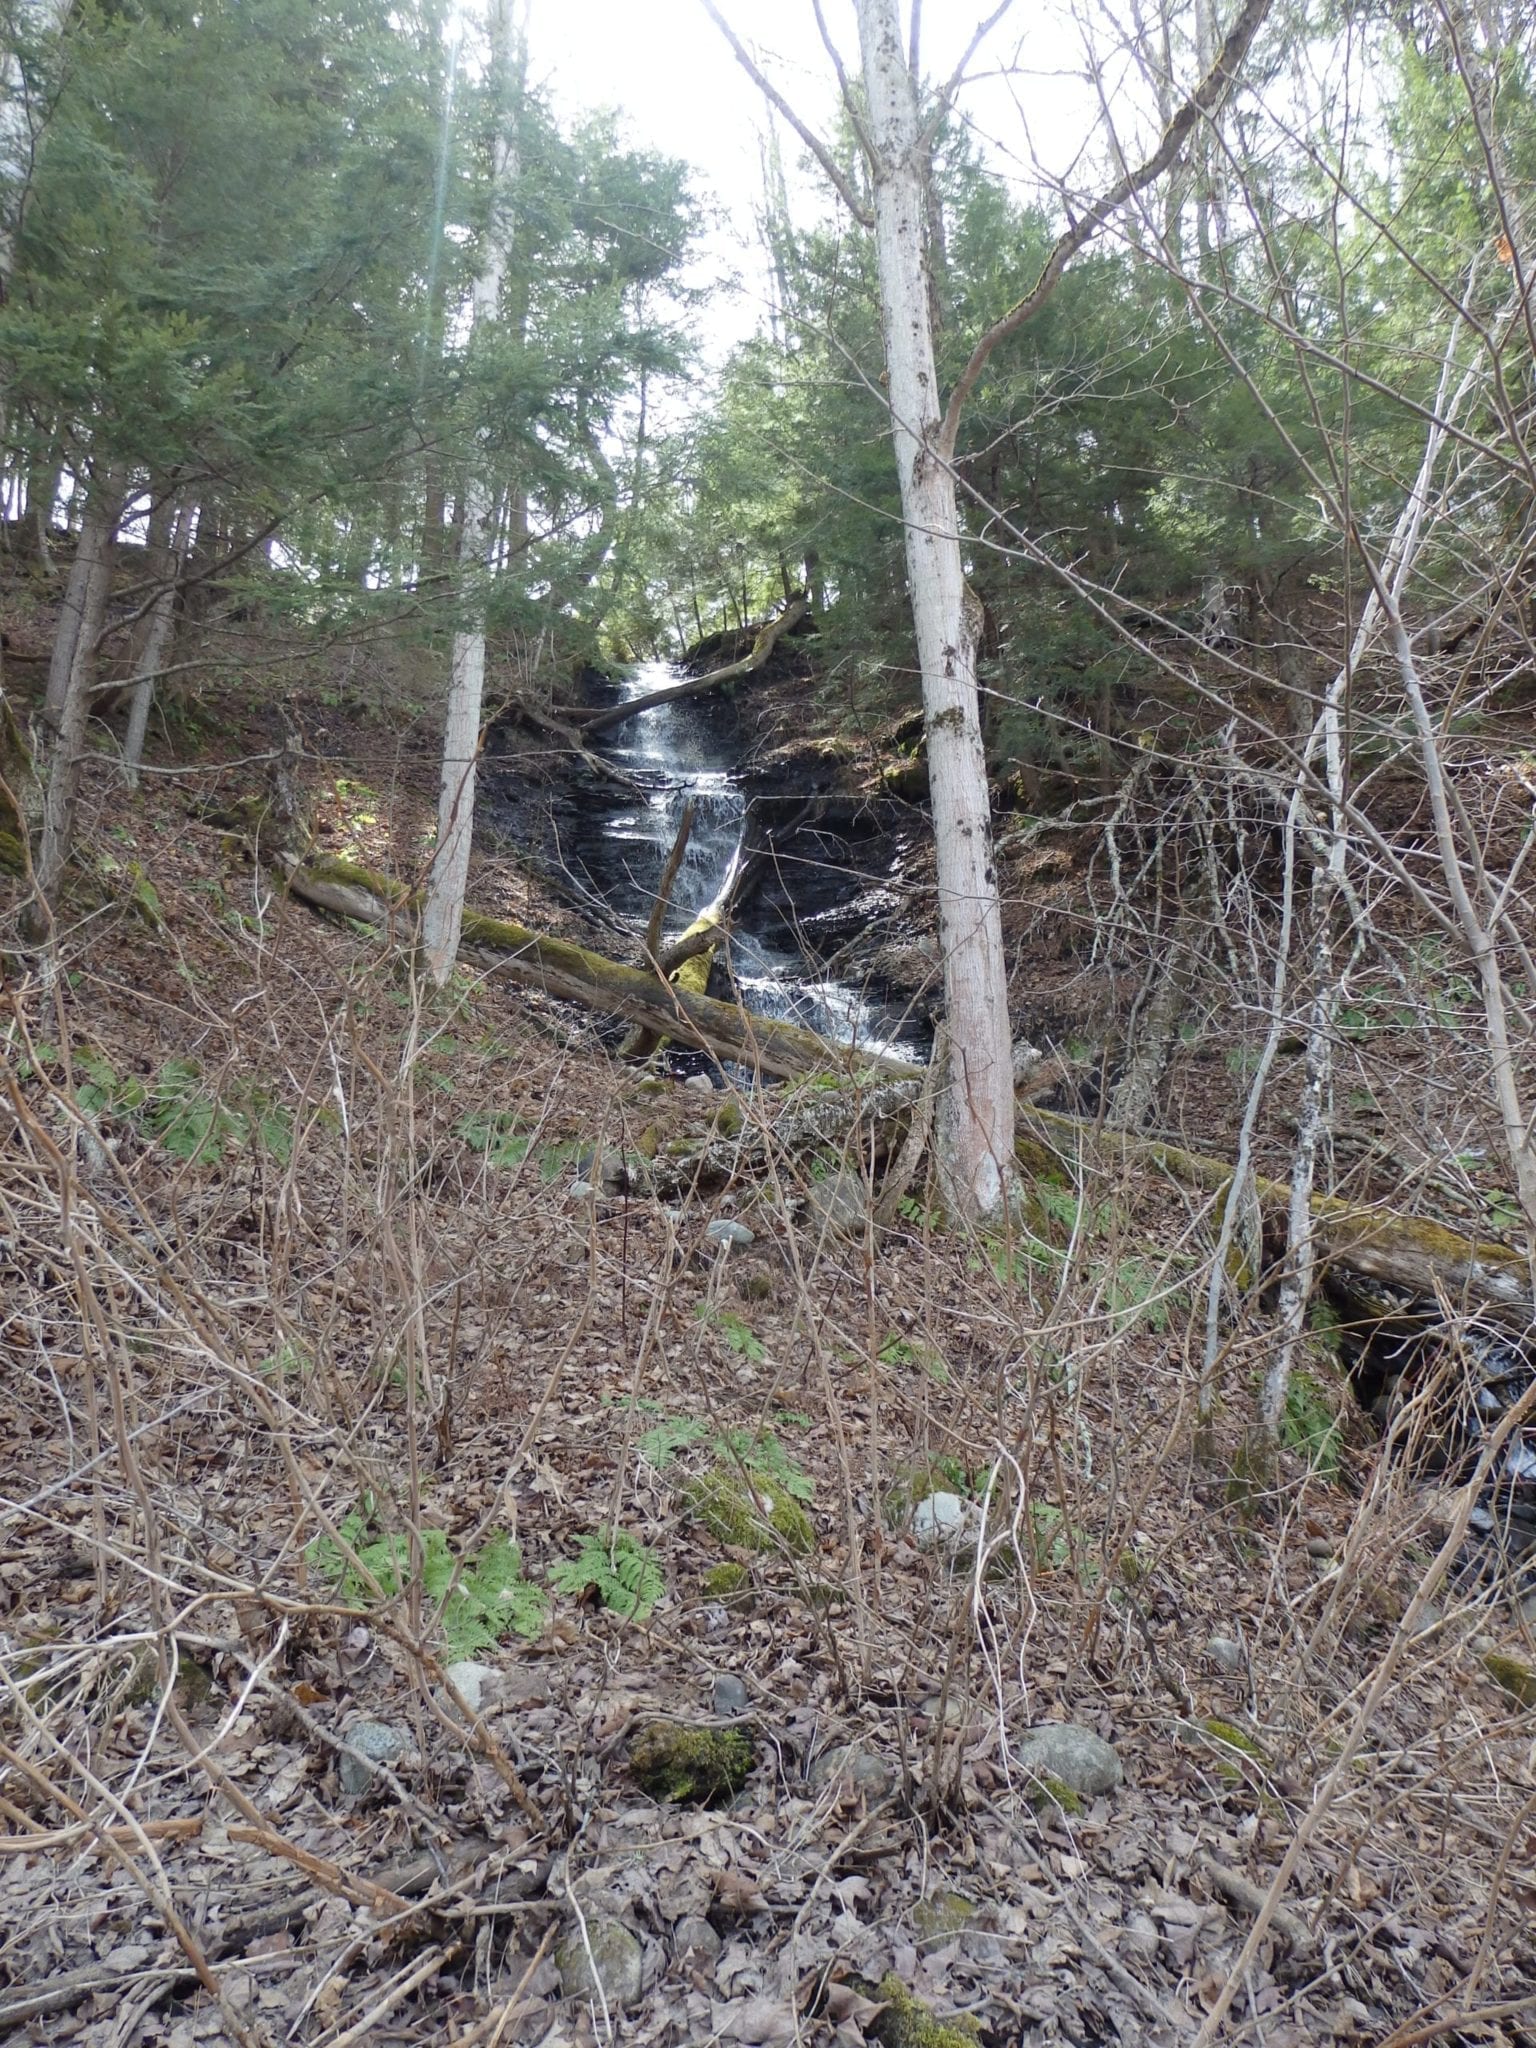 Moccasin Kill, Falls on – Rotterdam, Town of, Schenectady